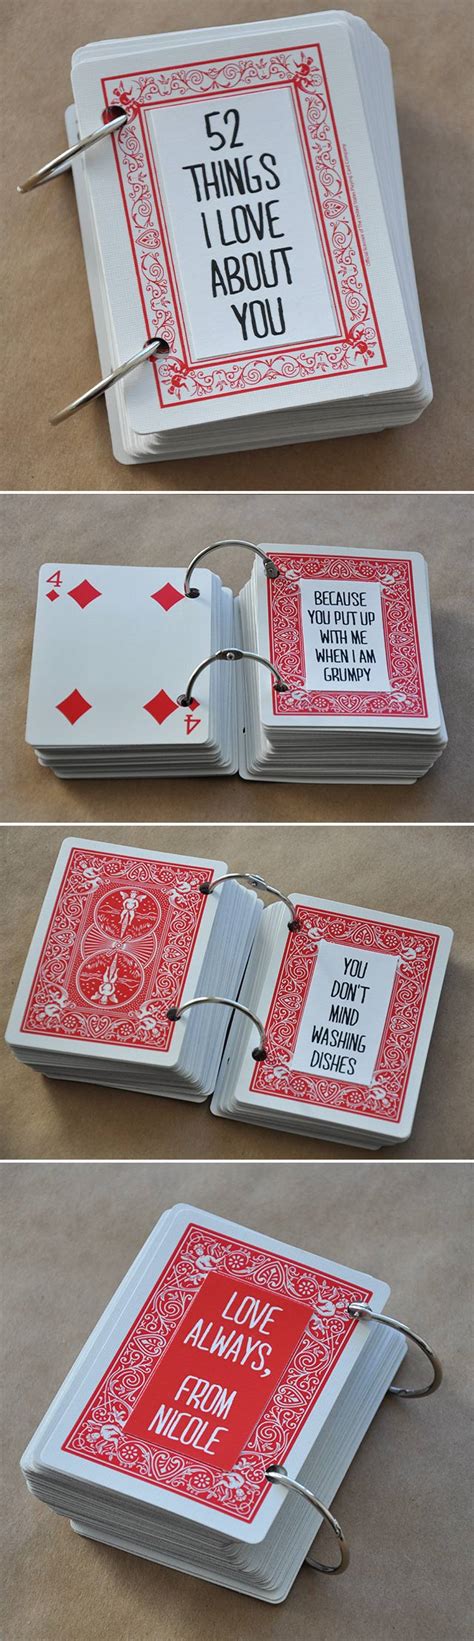 21 Things I Love About You Deck Of Cards Template